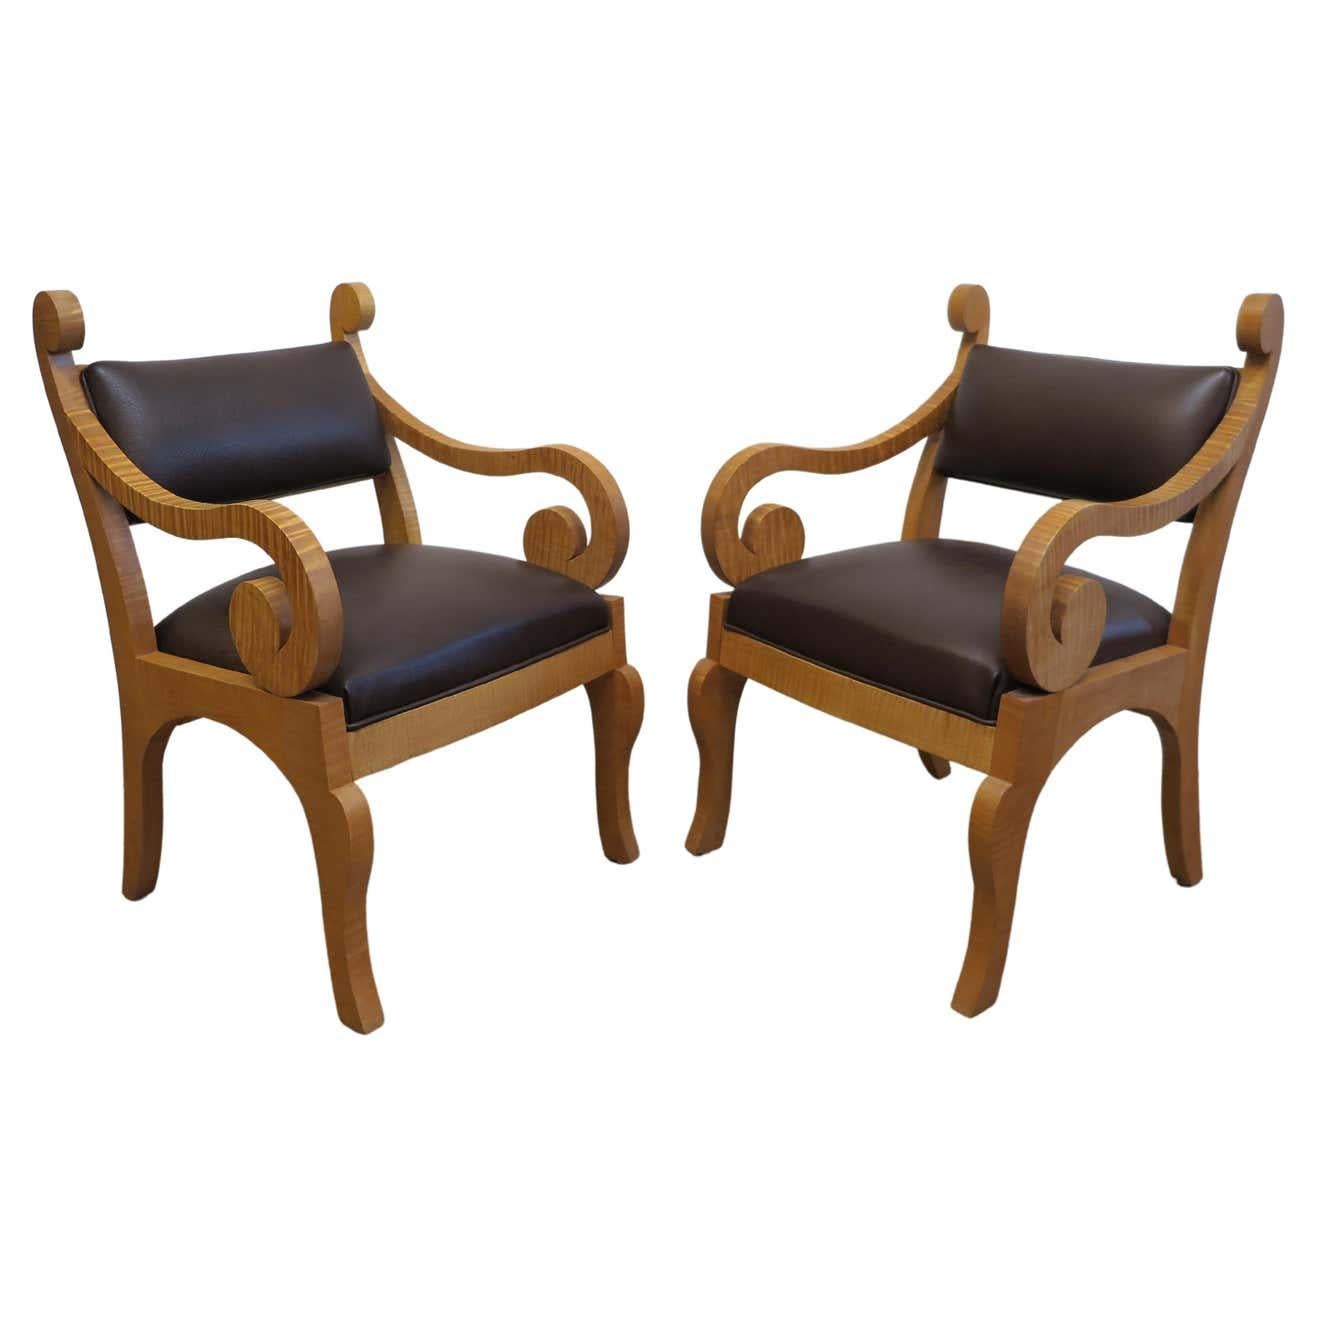 Custom made Tiger Maple Biedermeier inspired dining chairs. Beautifully crafted of solid Tiger Maple wood with a touch of whimsical Biedermeier style show casing the the magnificent qualities of the wood. Elmo Grand leather adding a plush seat and